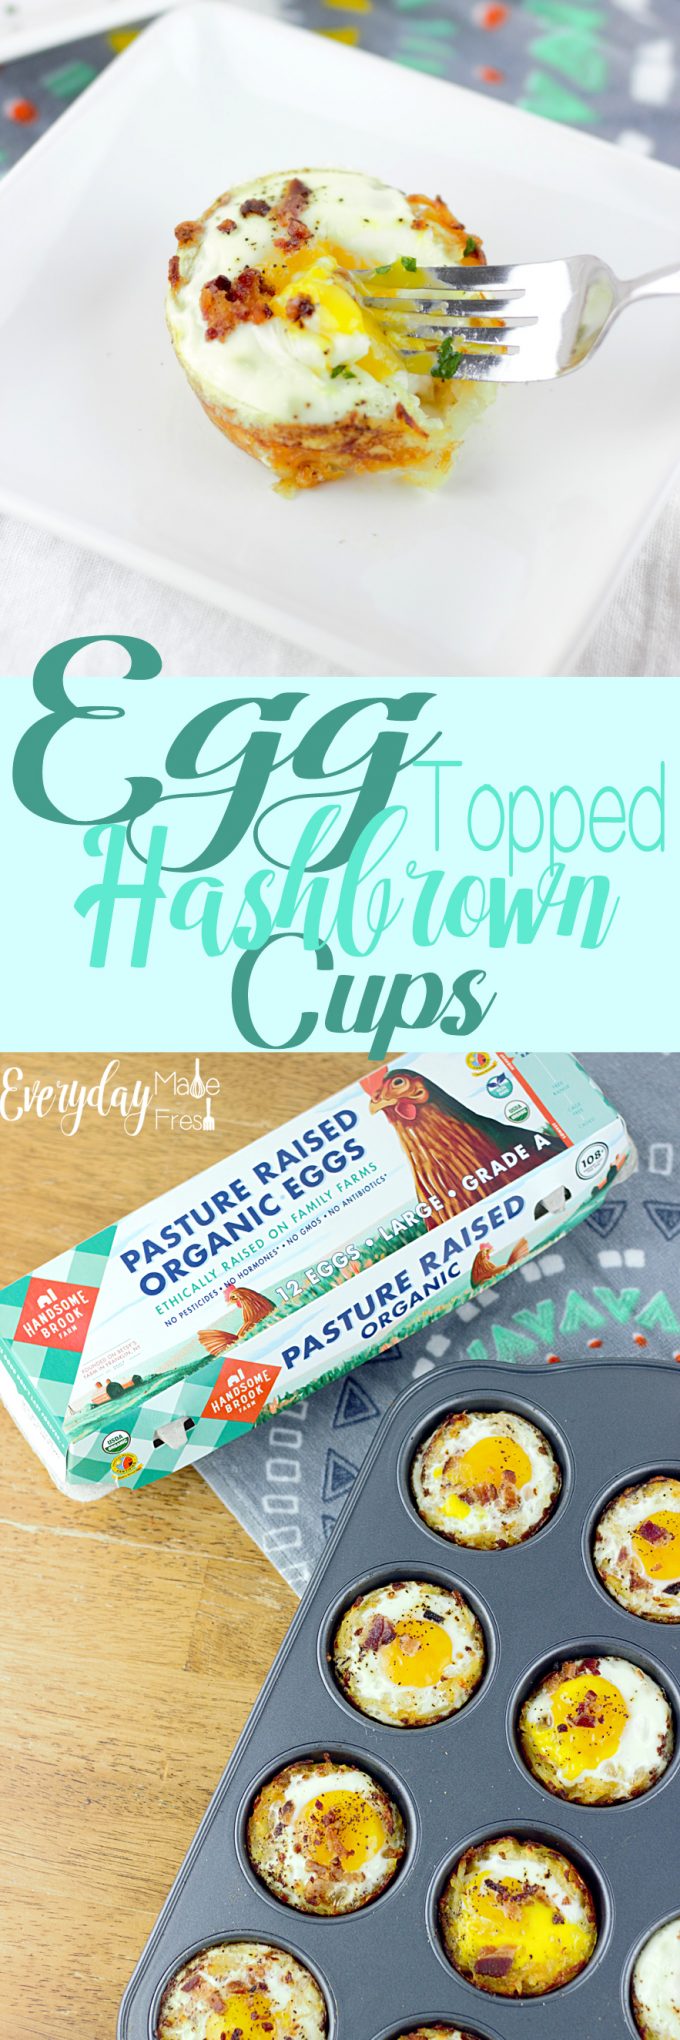 When your short on time these Cheesy Hash Brown Egg Cups are the perfect go-to breakfast. Crispy and cheesy hashbrowns on the bottom, topped with a perfectly cooked egg, baked in the oven, you'll not only save time, but also clean-up.  | EverydayMadeFresh.com